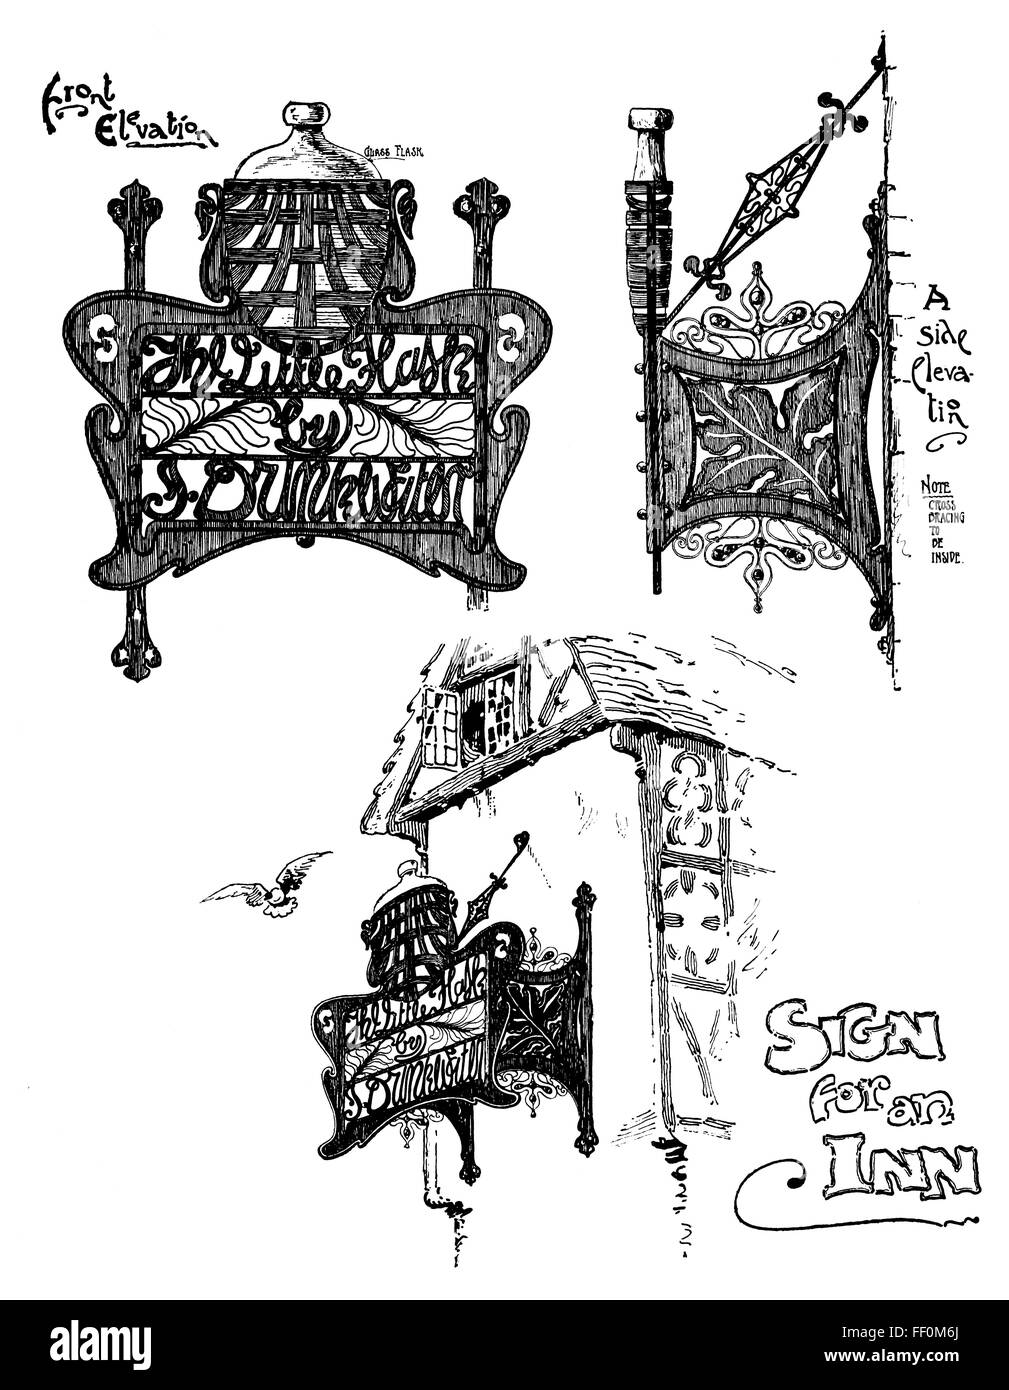 Sign for an Inn, art nouveau metalwork design by Charles G Thompson of Liverpool, line Illustration from 1897 Studio Magazine Stock Photo